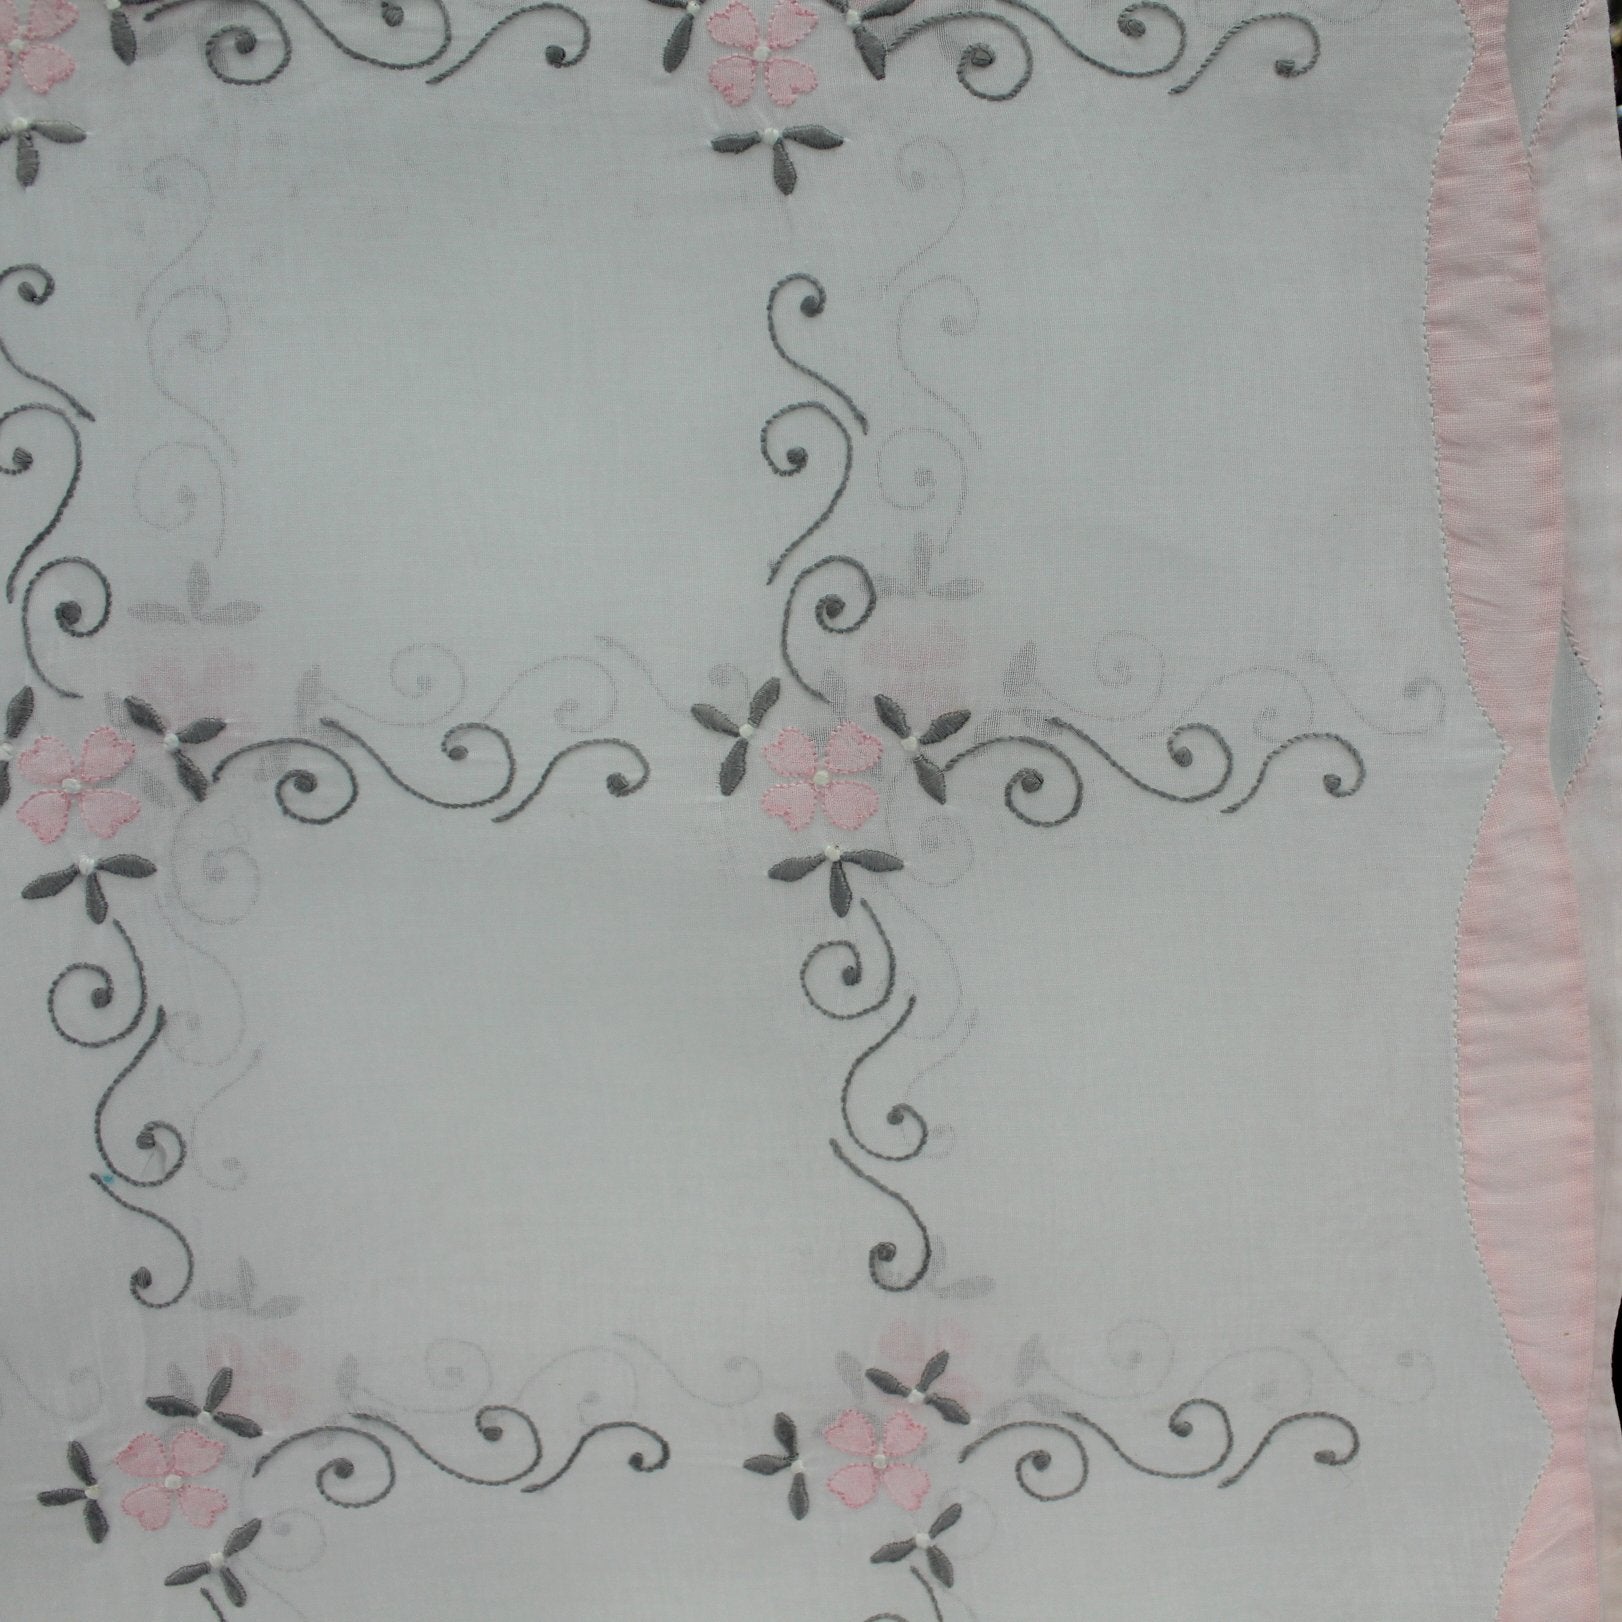 Elegant Small White Organdy Table Cloth Embroidery Pink Flower Applique Metal Label "I" close squares design